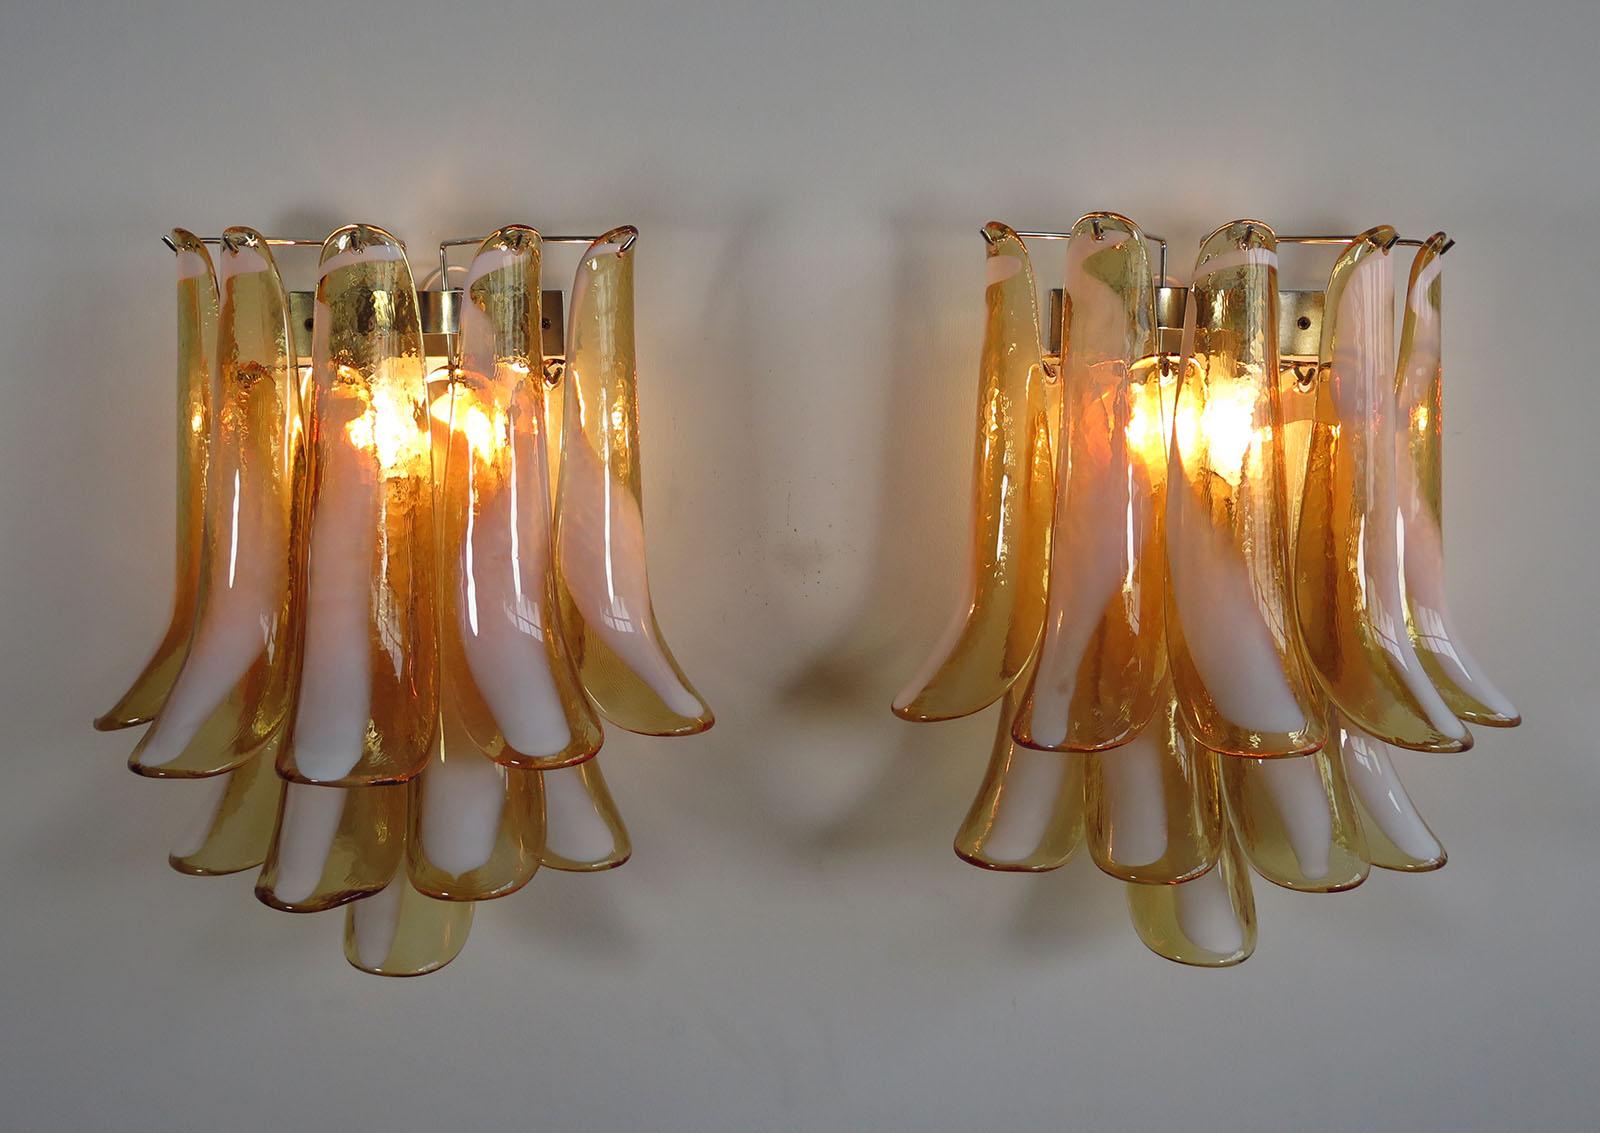 Pair of vintage Italian Murano appliques in the manner of Mazzega. Wall lights have 10 caramel lattimo glass petals (for each applique) in a chrome frame.
Period: 1970s
Dimensions: 16.50 inches (42 cm) height, 13.80 inches (35 cm) width, 7.90